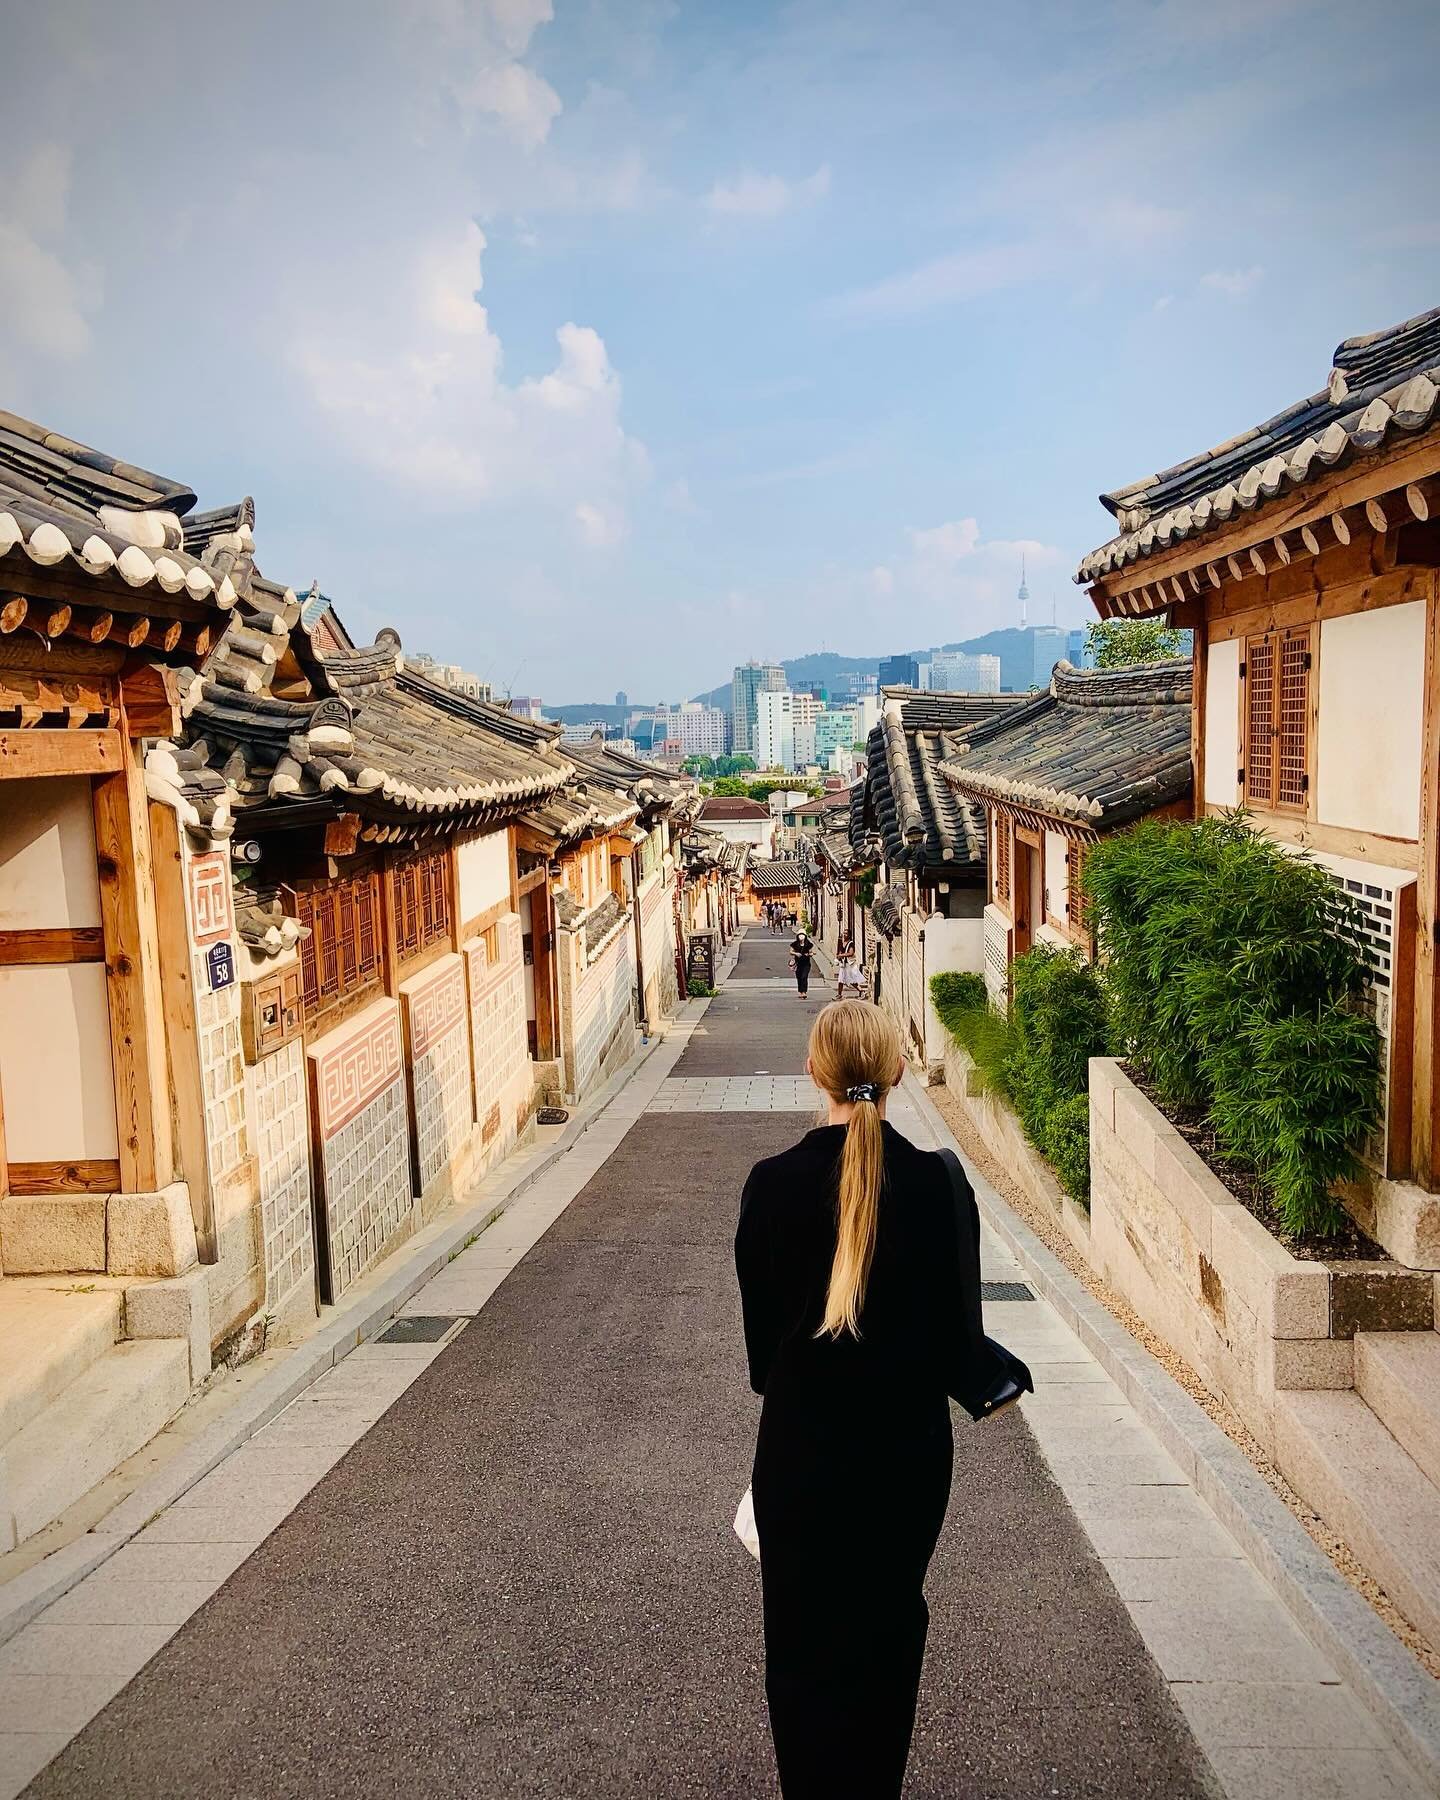 I've been watching too many South K reels lately so mentally I'm there right now 🥲🫶 Pictures been taken at beautiful Bukchon Hanok Village #북촌한옥마을 which is packed with tourists most of the time. But it was around 40 degrees and humid af by the time